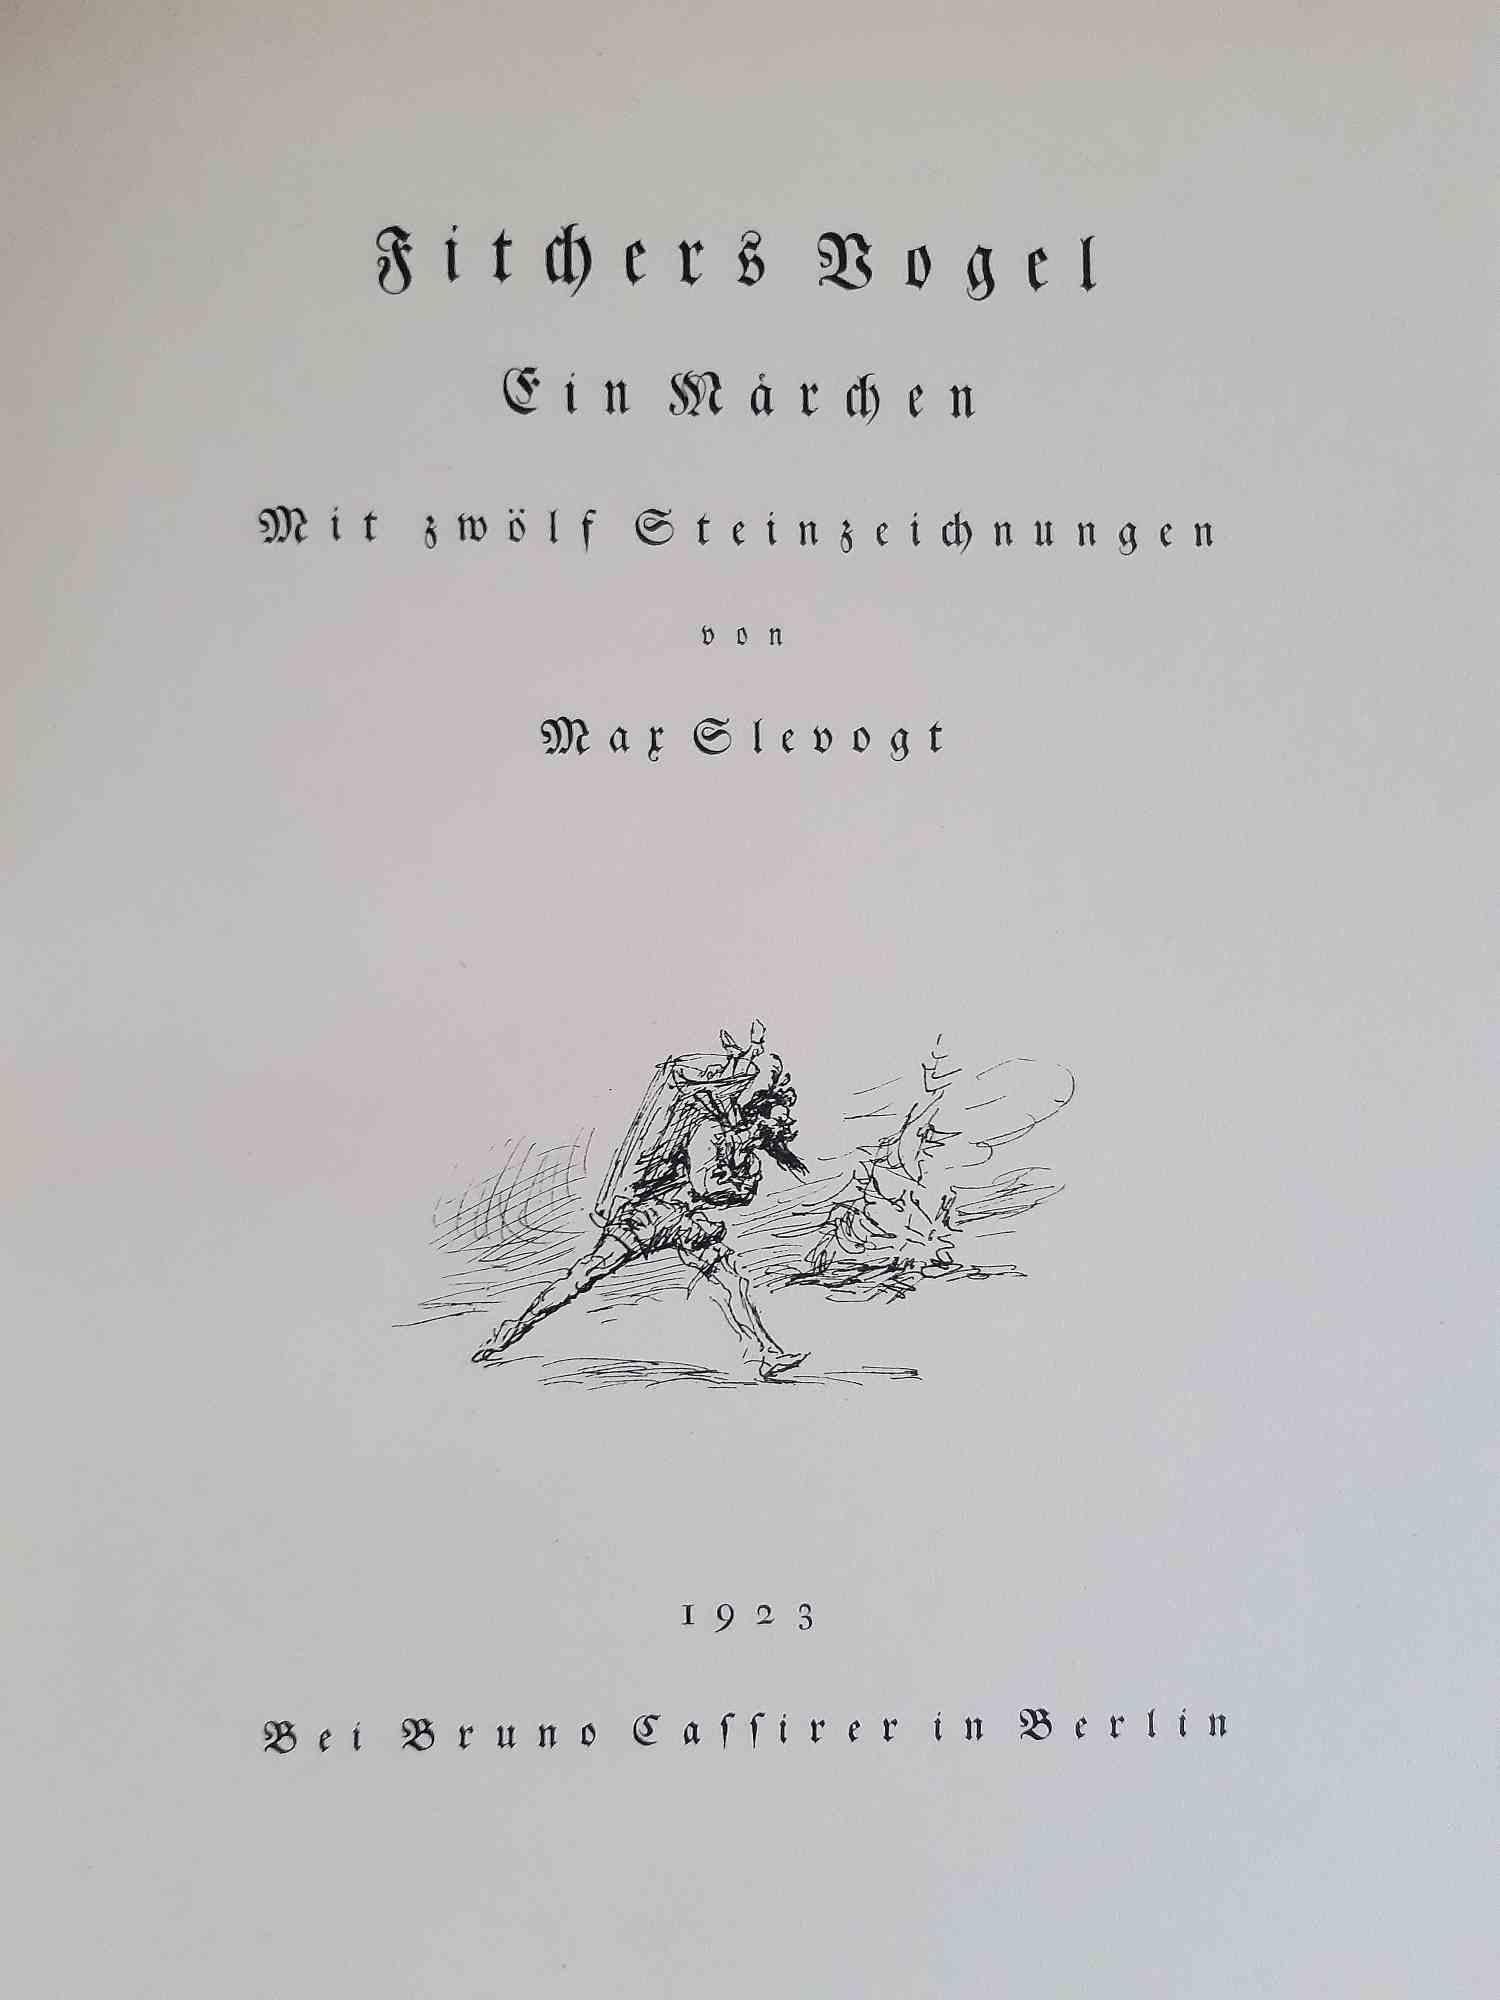 Die tapferen Zehntausend is an original rare book written by Jacob and Wilhelm Grimm and illustrated by Max Slevogt (Landshut, 8 October 1868 – Leinsweiler , 20 September 1932) in 1923.

Original Edition.

360 Numbered and Signed Copies.

Published